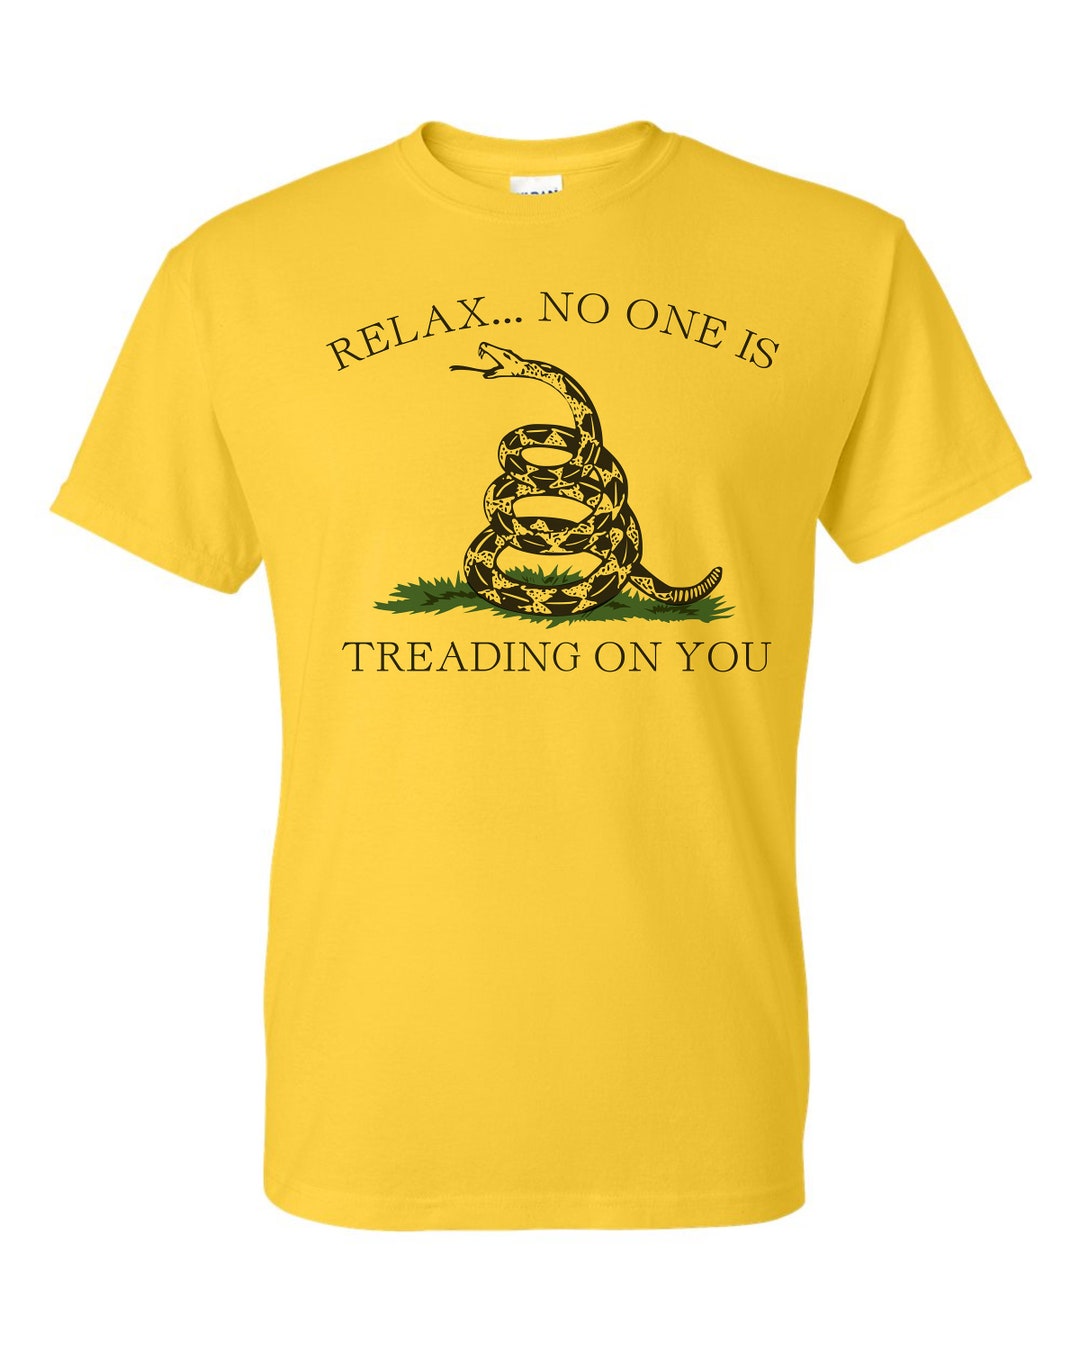 Relax... No One is Treading on You T-shirt - Etsy